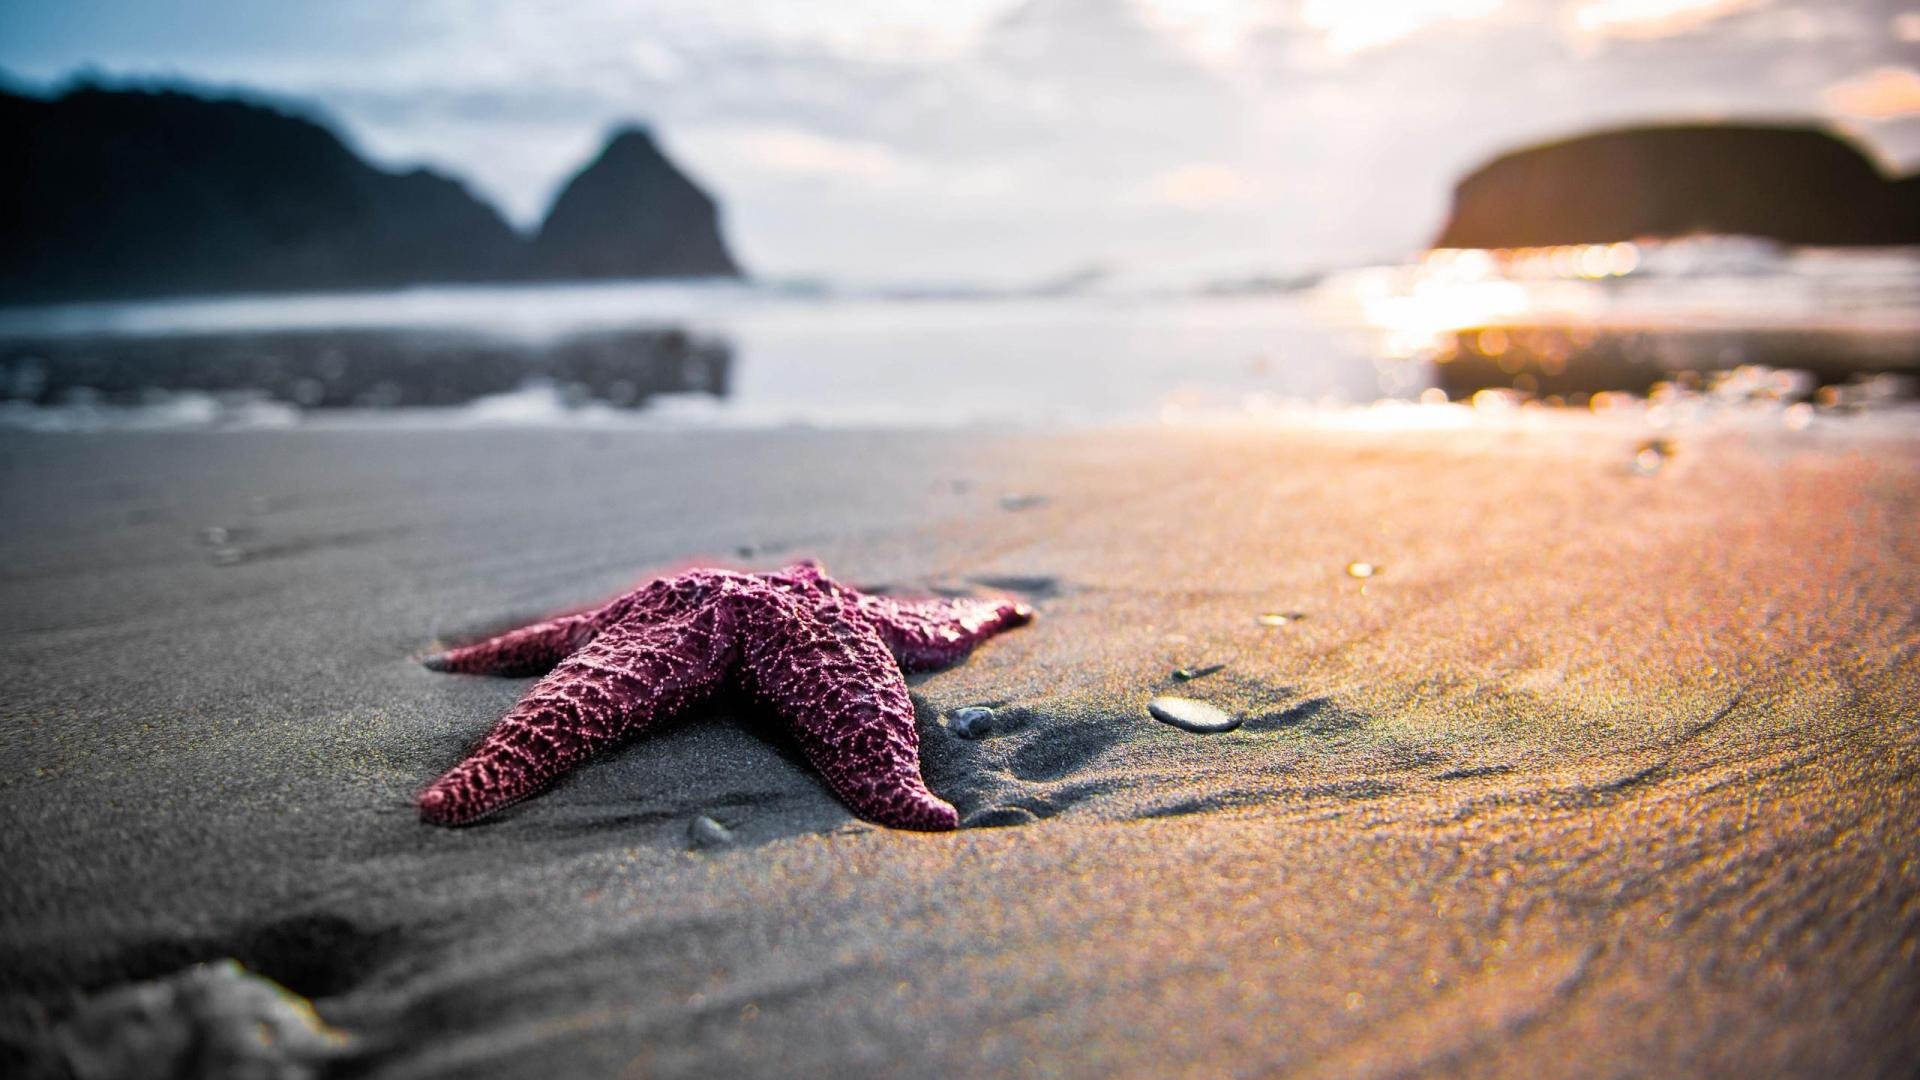 Sea Star: Ocean, Some species can have up to 40 arms, Shore, Coastal line. 1920x1080 Full HD Wallpaper.